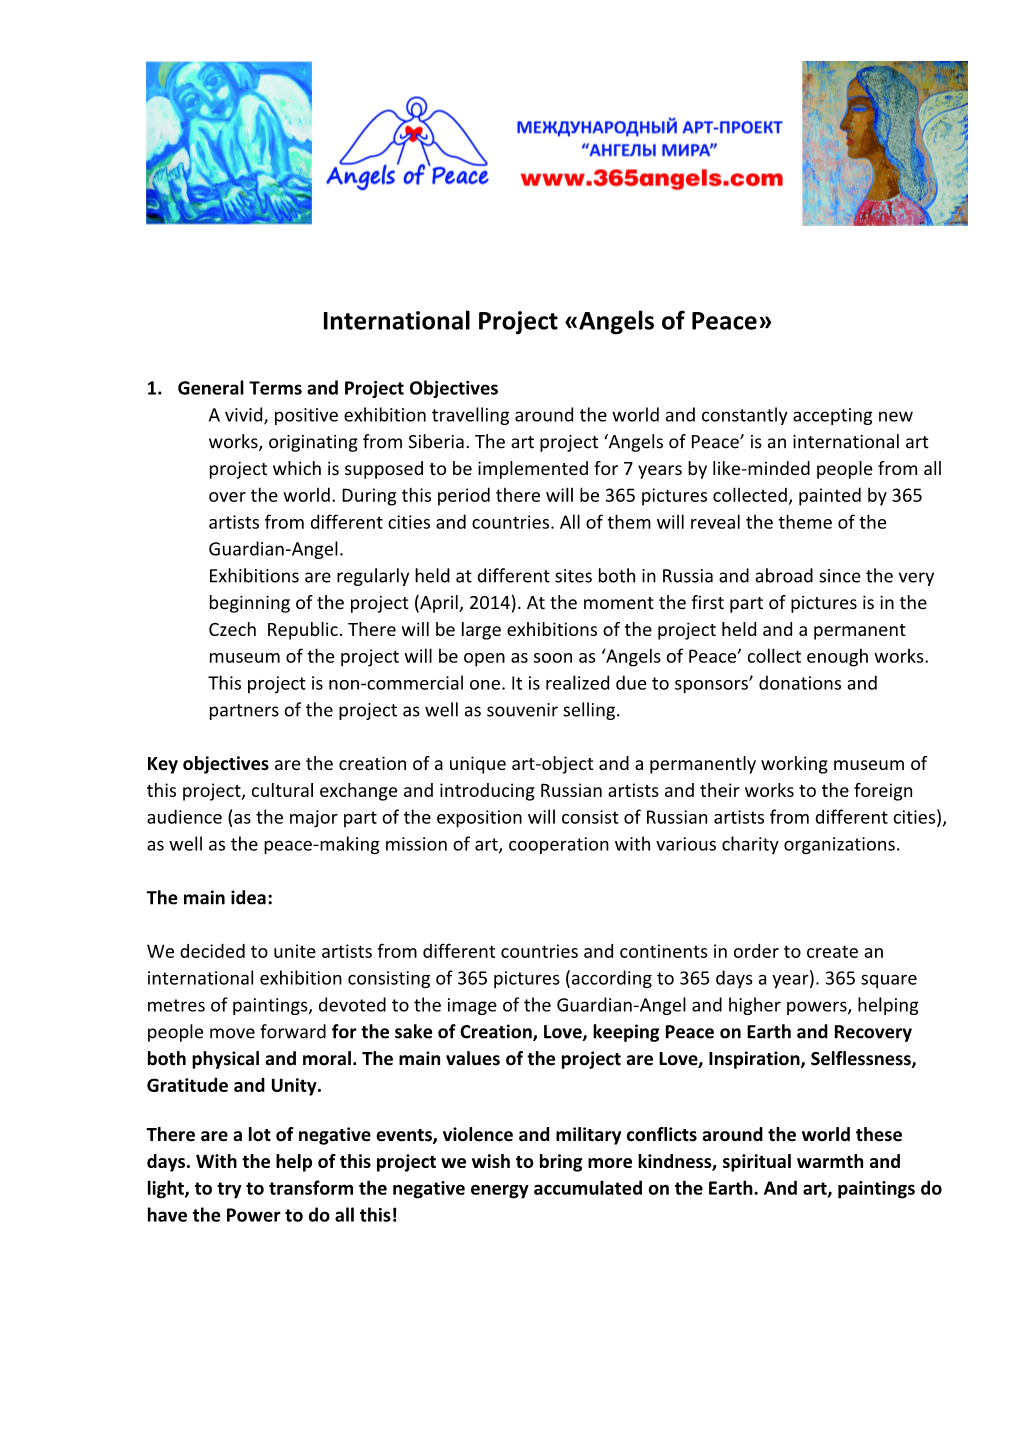 International Project Angels of Peace